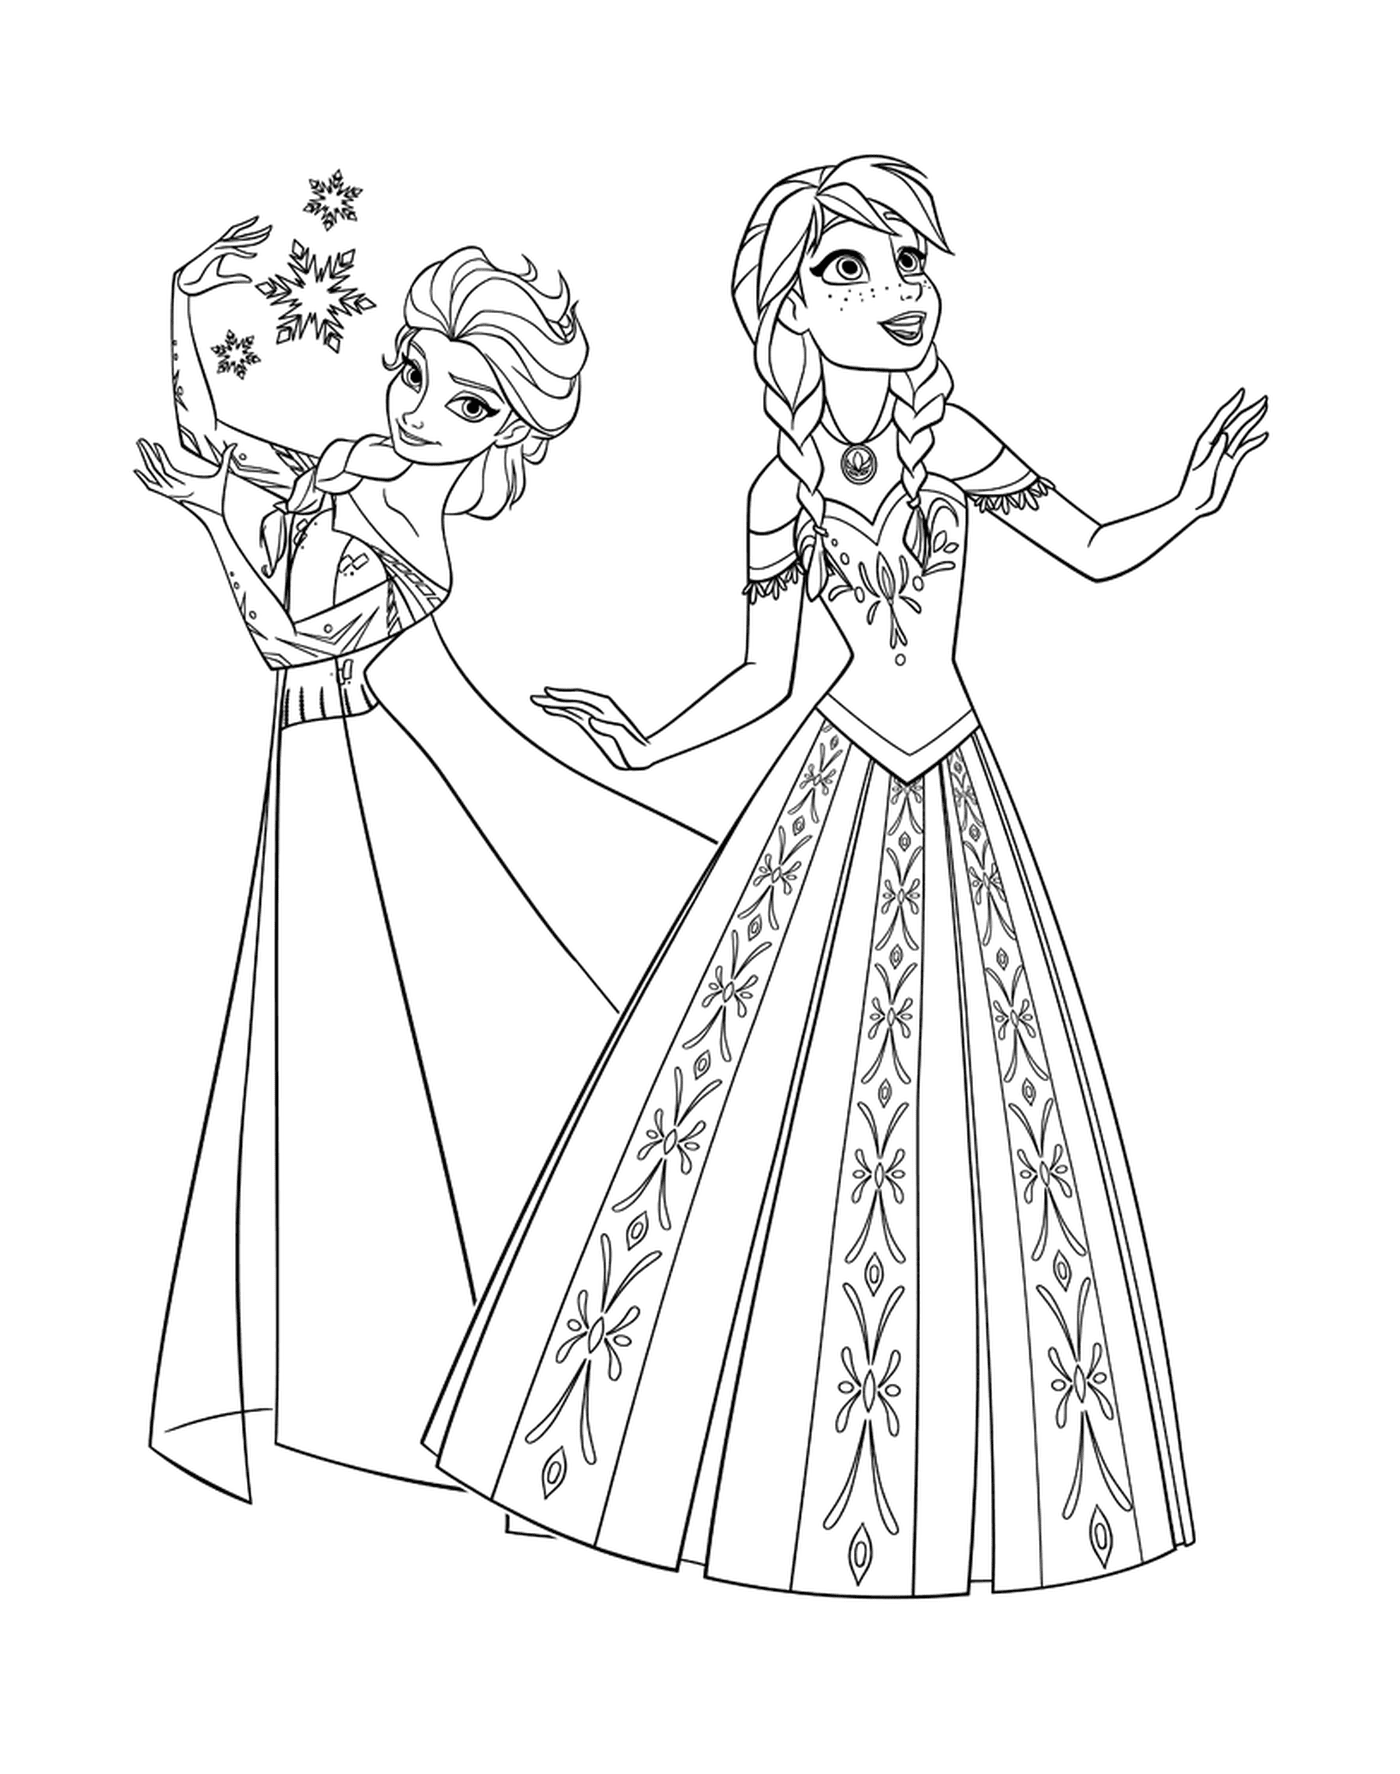  Anna and Elsa, Princesses of The Snow Queen 